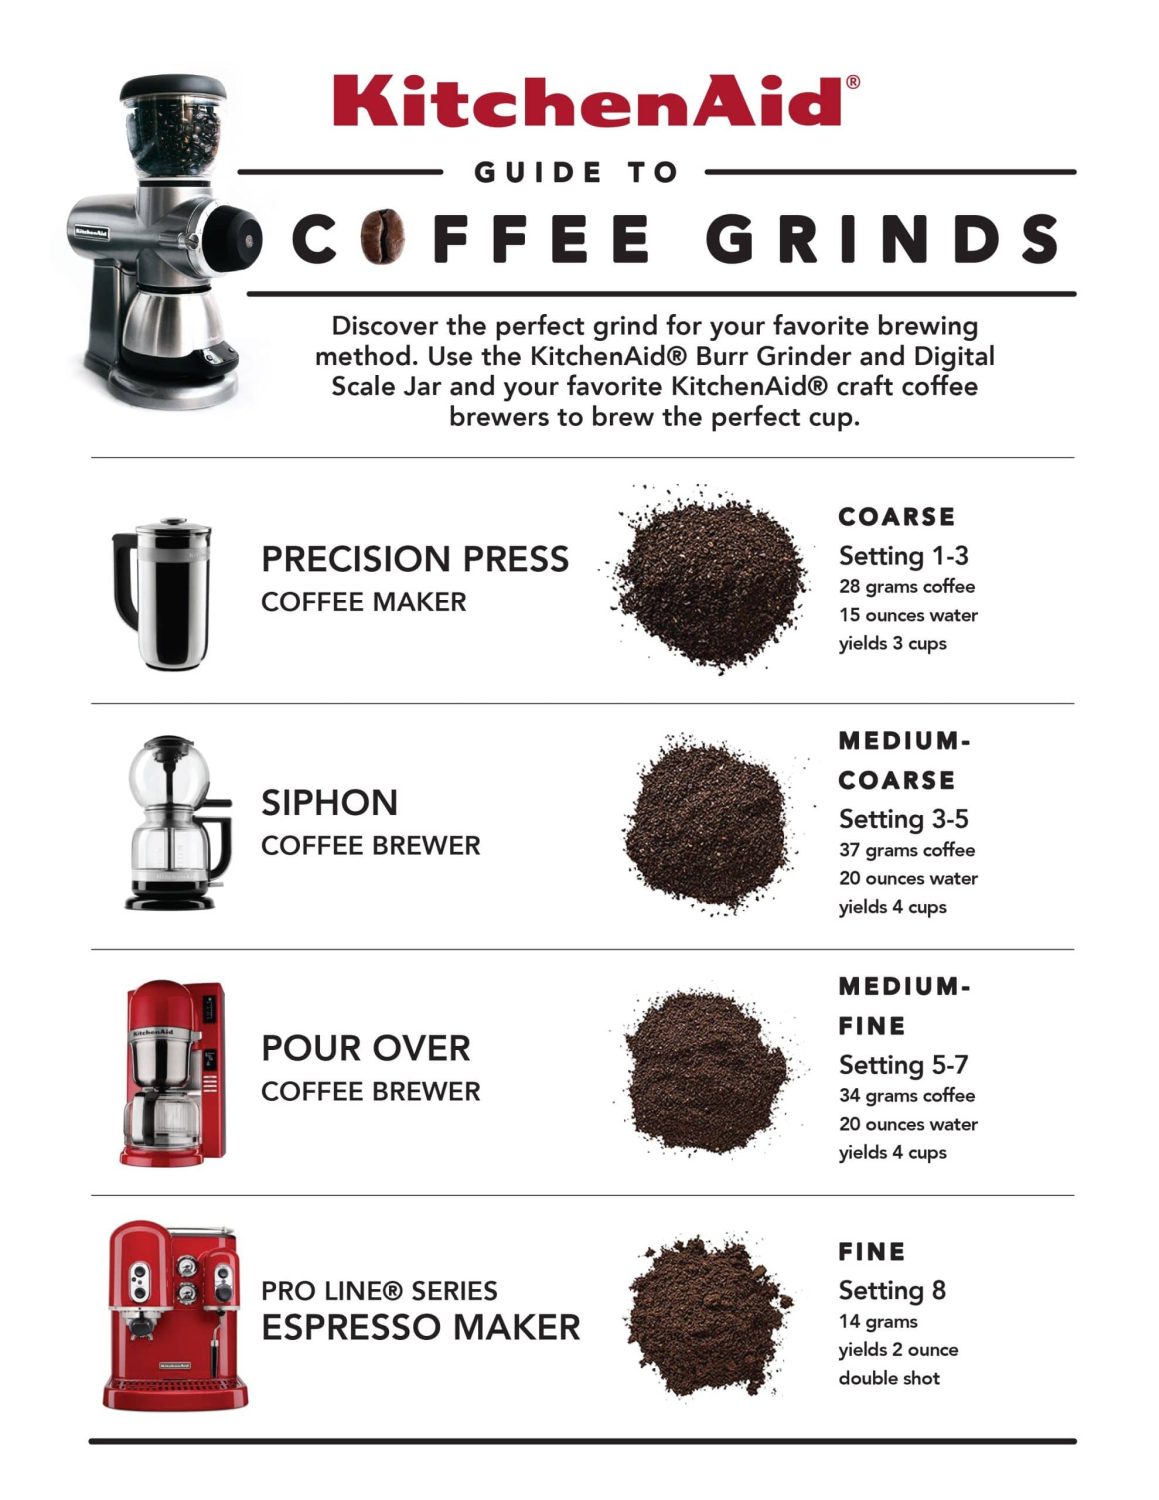 How Do You Use A Coffee Grinder To Get The Right Grind Size?